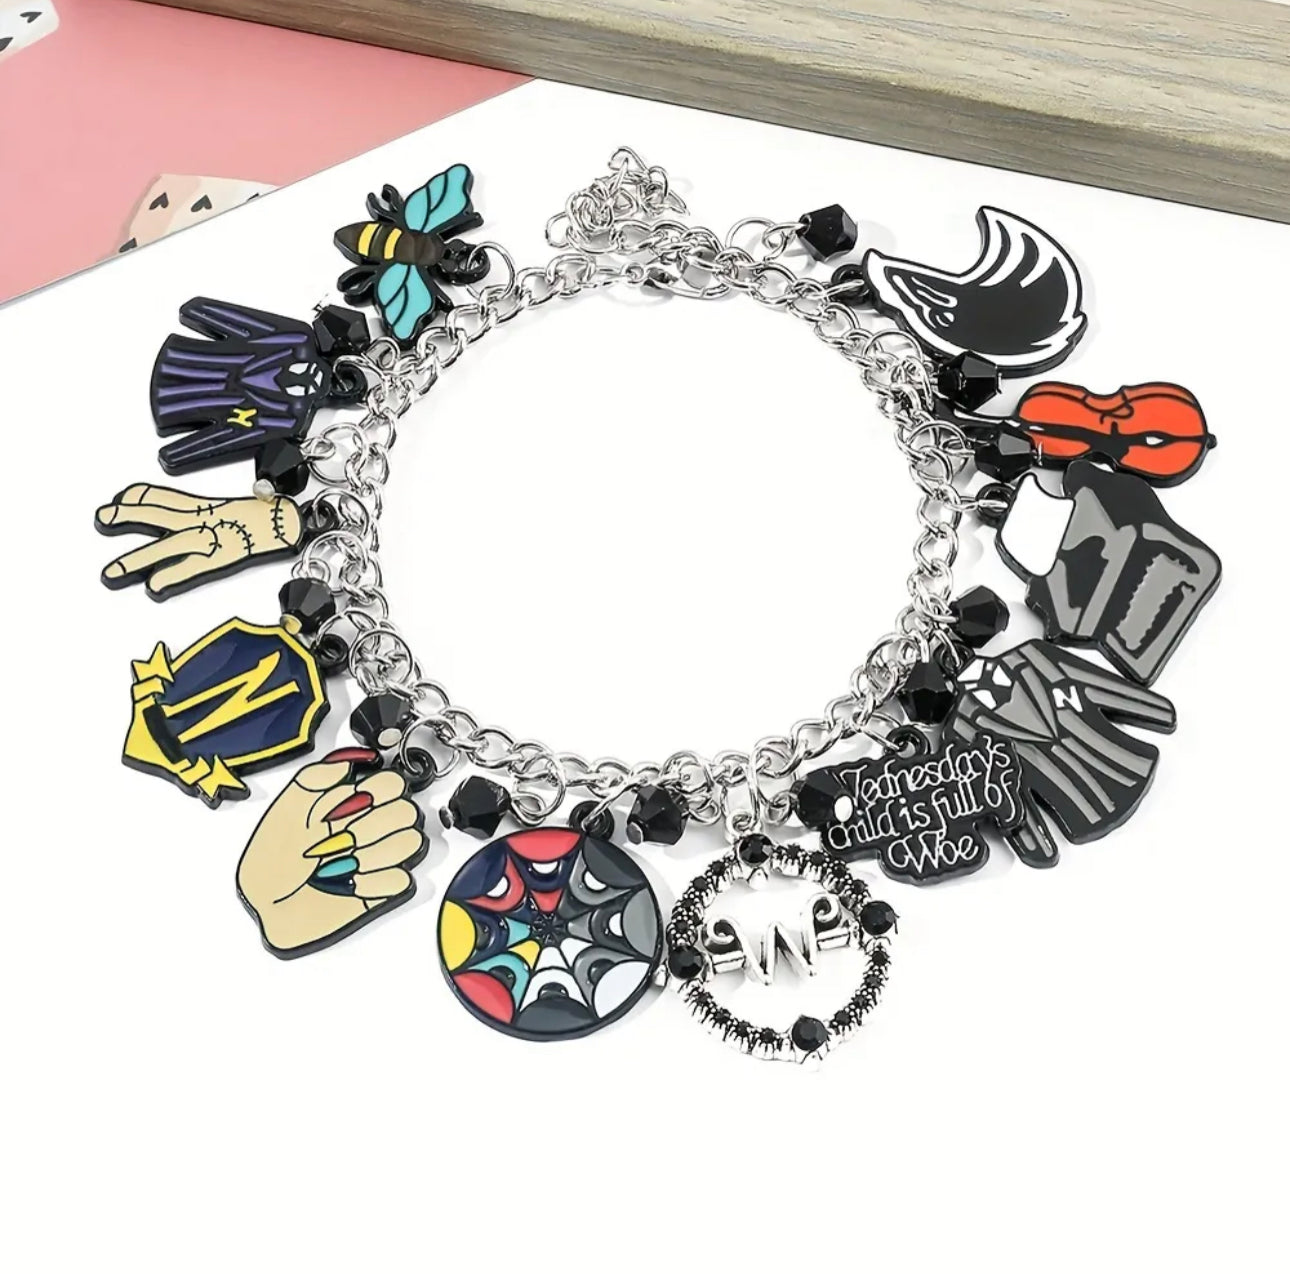 Creative Trendy Charm Bracelet With Guitar Finger Clothes Pendant Decorative Accessories Holiday Gift For Boys And Girls